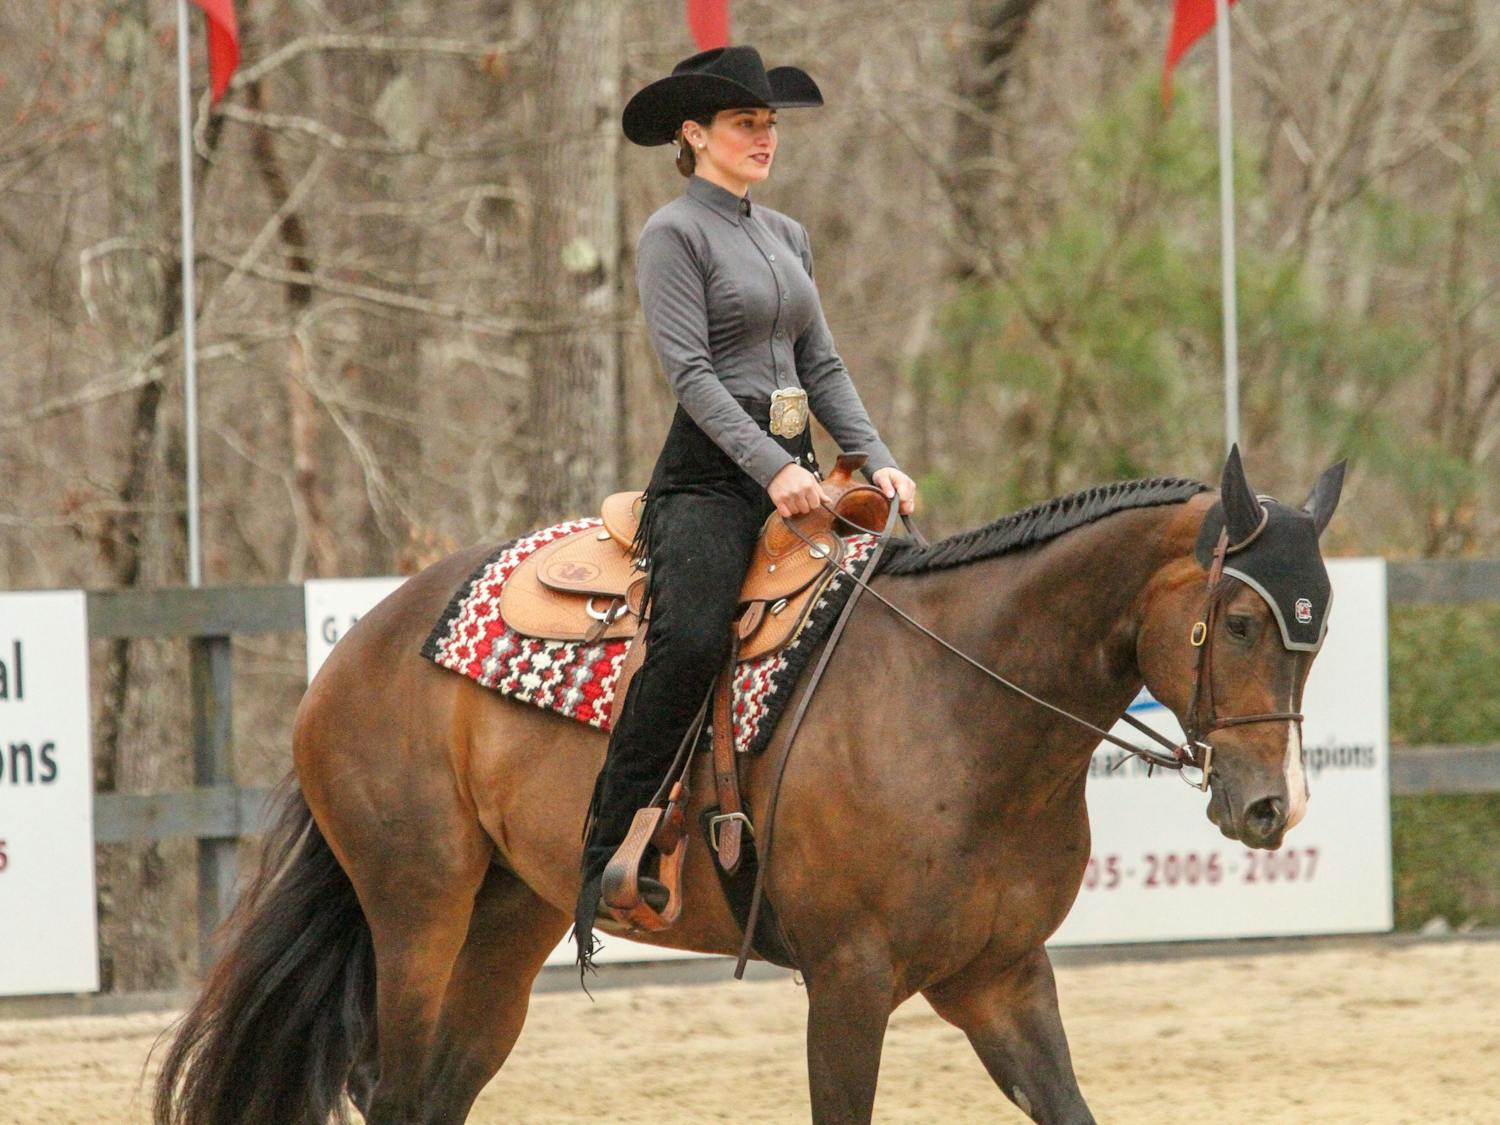 Senior Kiersten Beckner, mounted on Willy, competes in the horsemanship category during the meet against Texas A&amp;M at One Wood Farm on Feb. 11, 2023. Before every meet, Beckner listens to music to get in the zone and drinks a specific carbonated beverage. “I have to have a can of Coke to drink,” Beckner said.